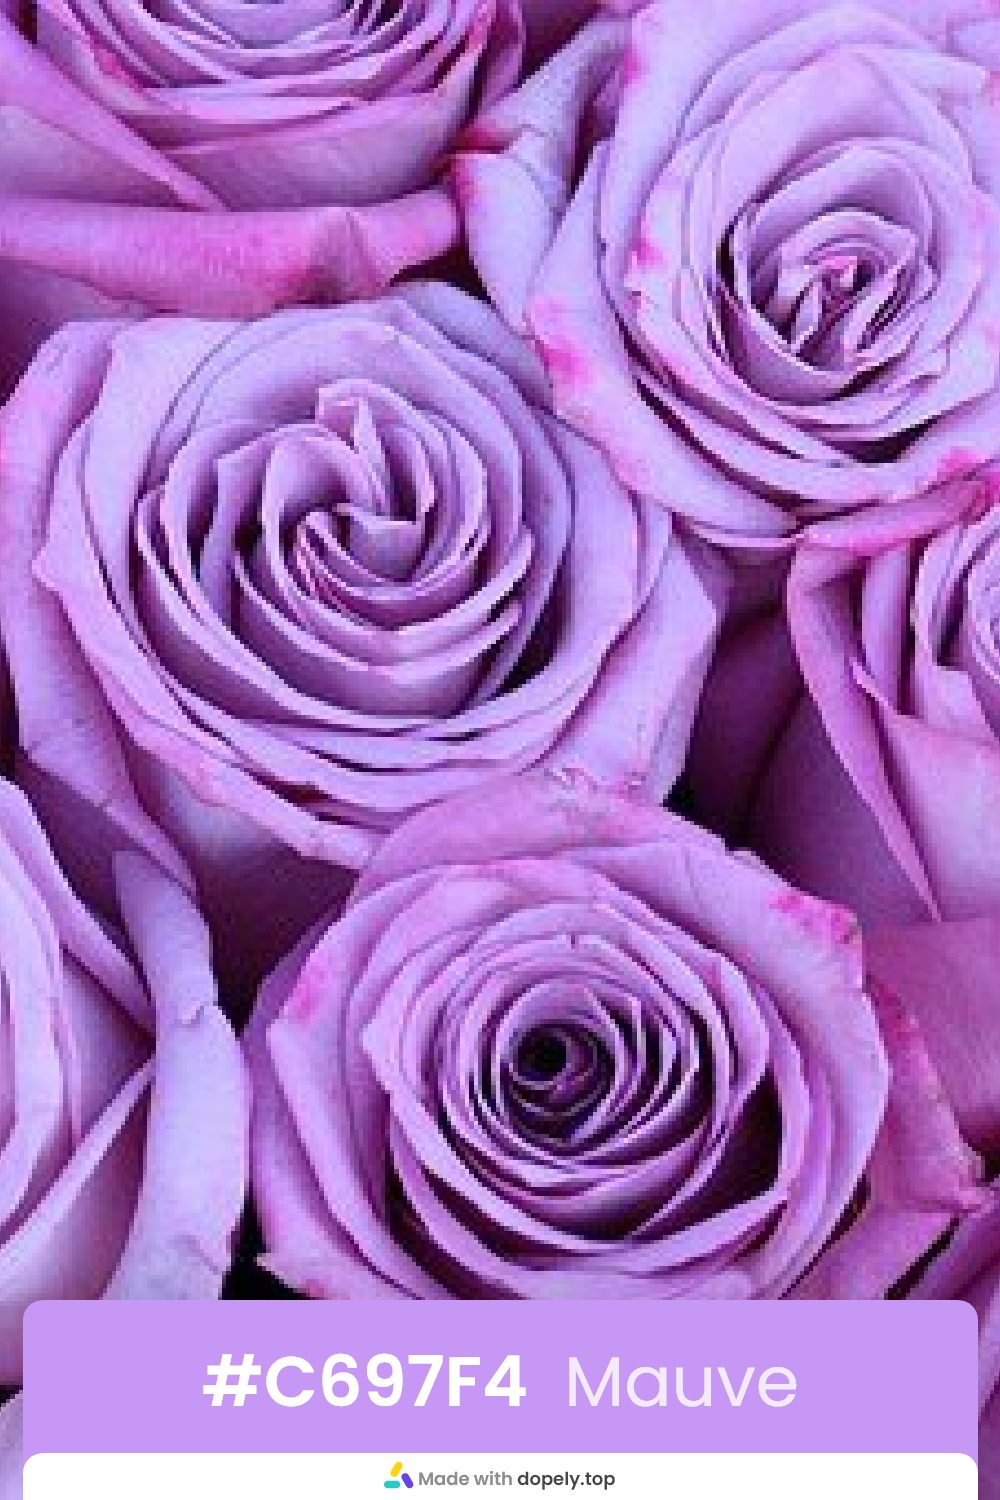 Mauve color rose flower with hex code